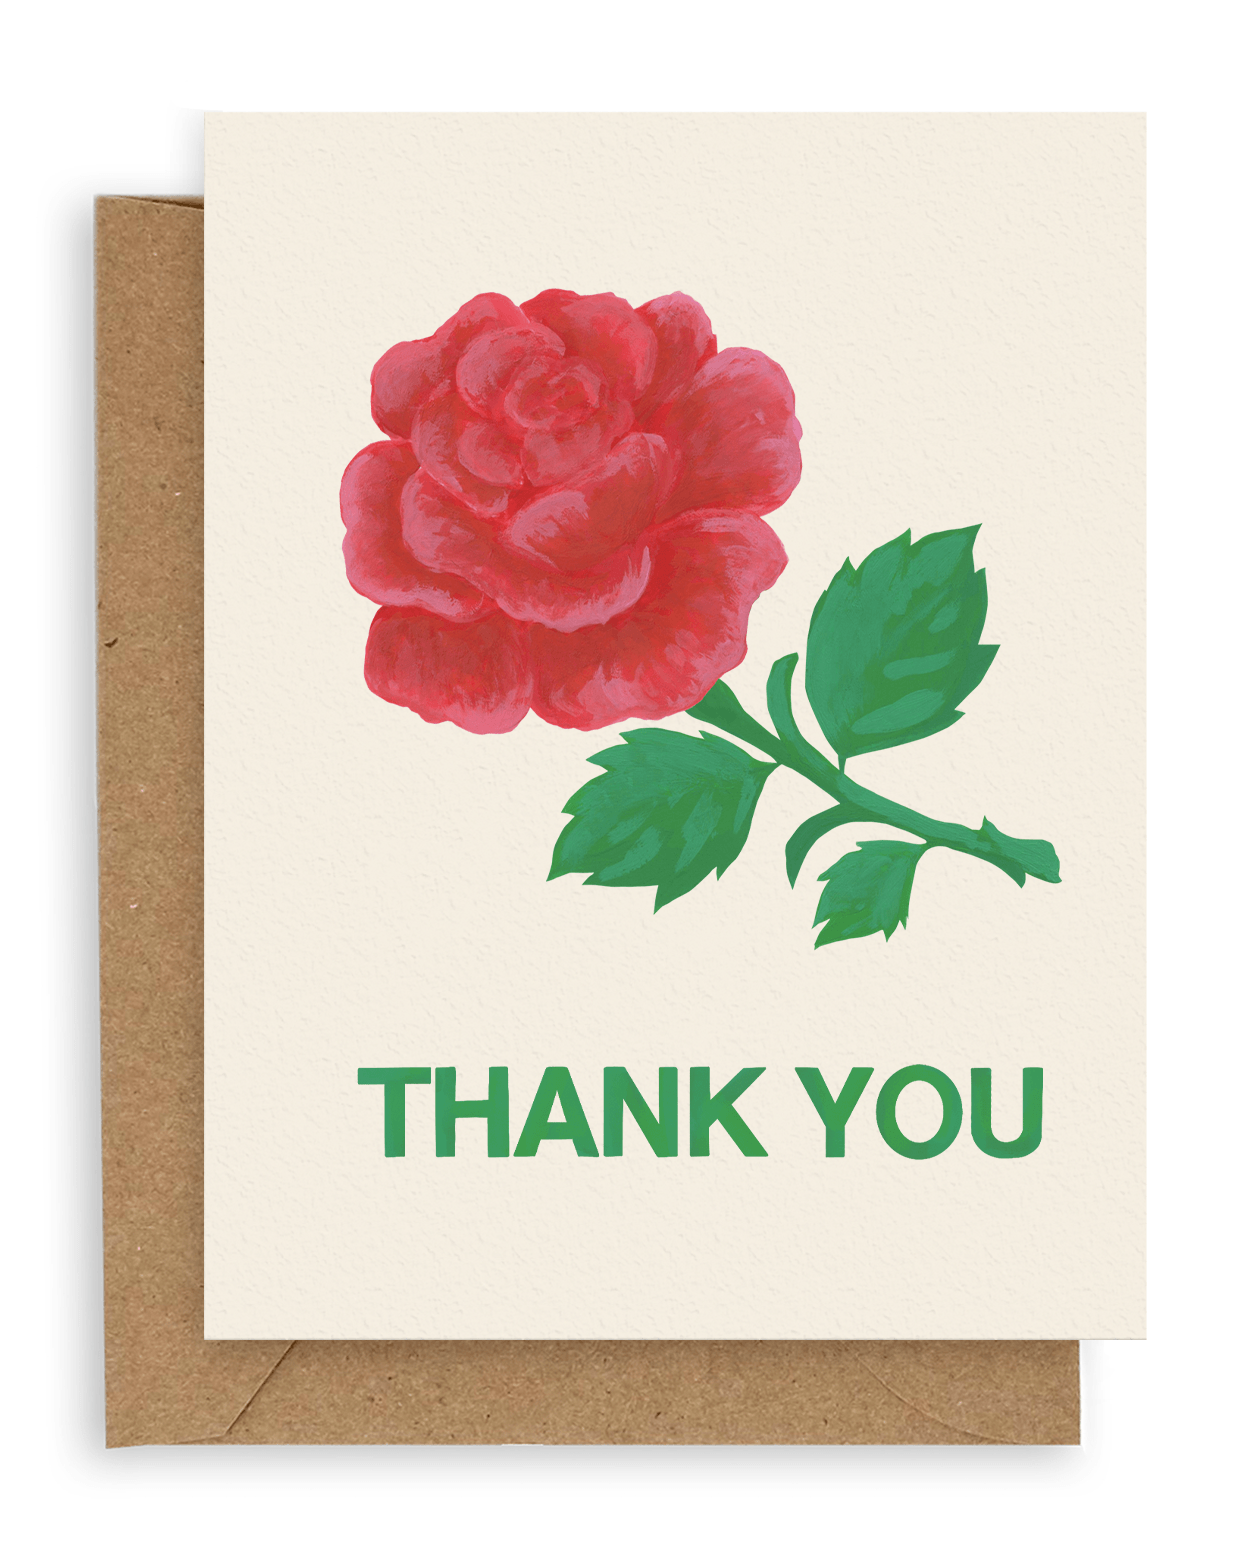  Cream colored background featuring a big red rose with a green stem and leaves, below it is written in green-colored font &quot;Thank You&quot; printed on cardstock with a kraft envelope.